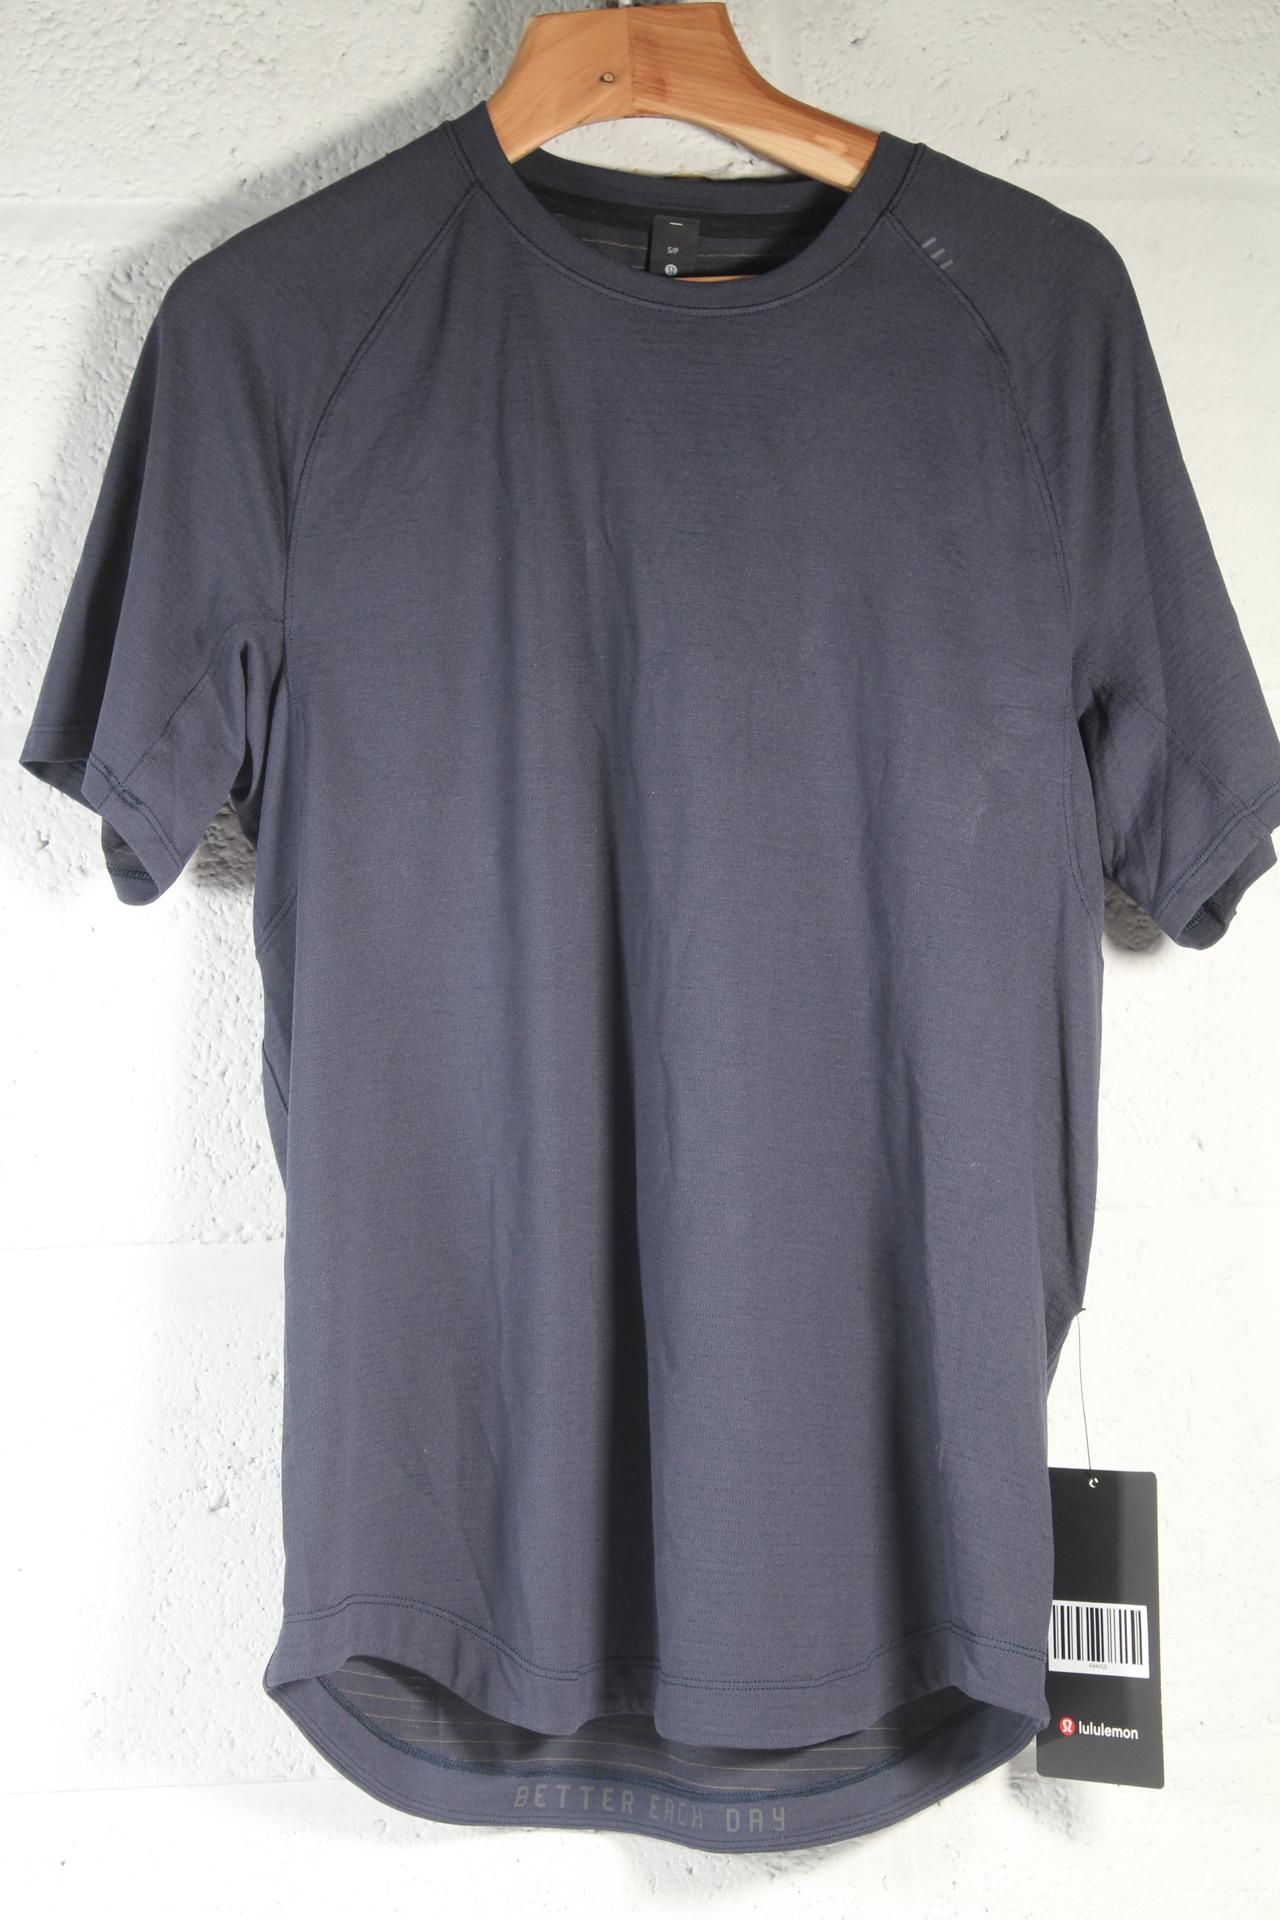 Lululemon License To Train Short Sleeve Navy T - Shirts, Size S (Please Note Security Tags Attached